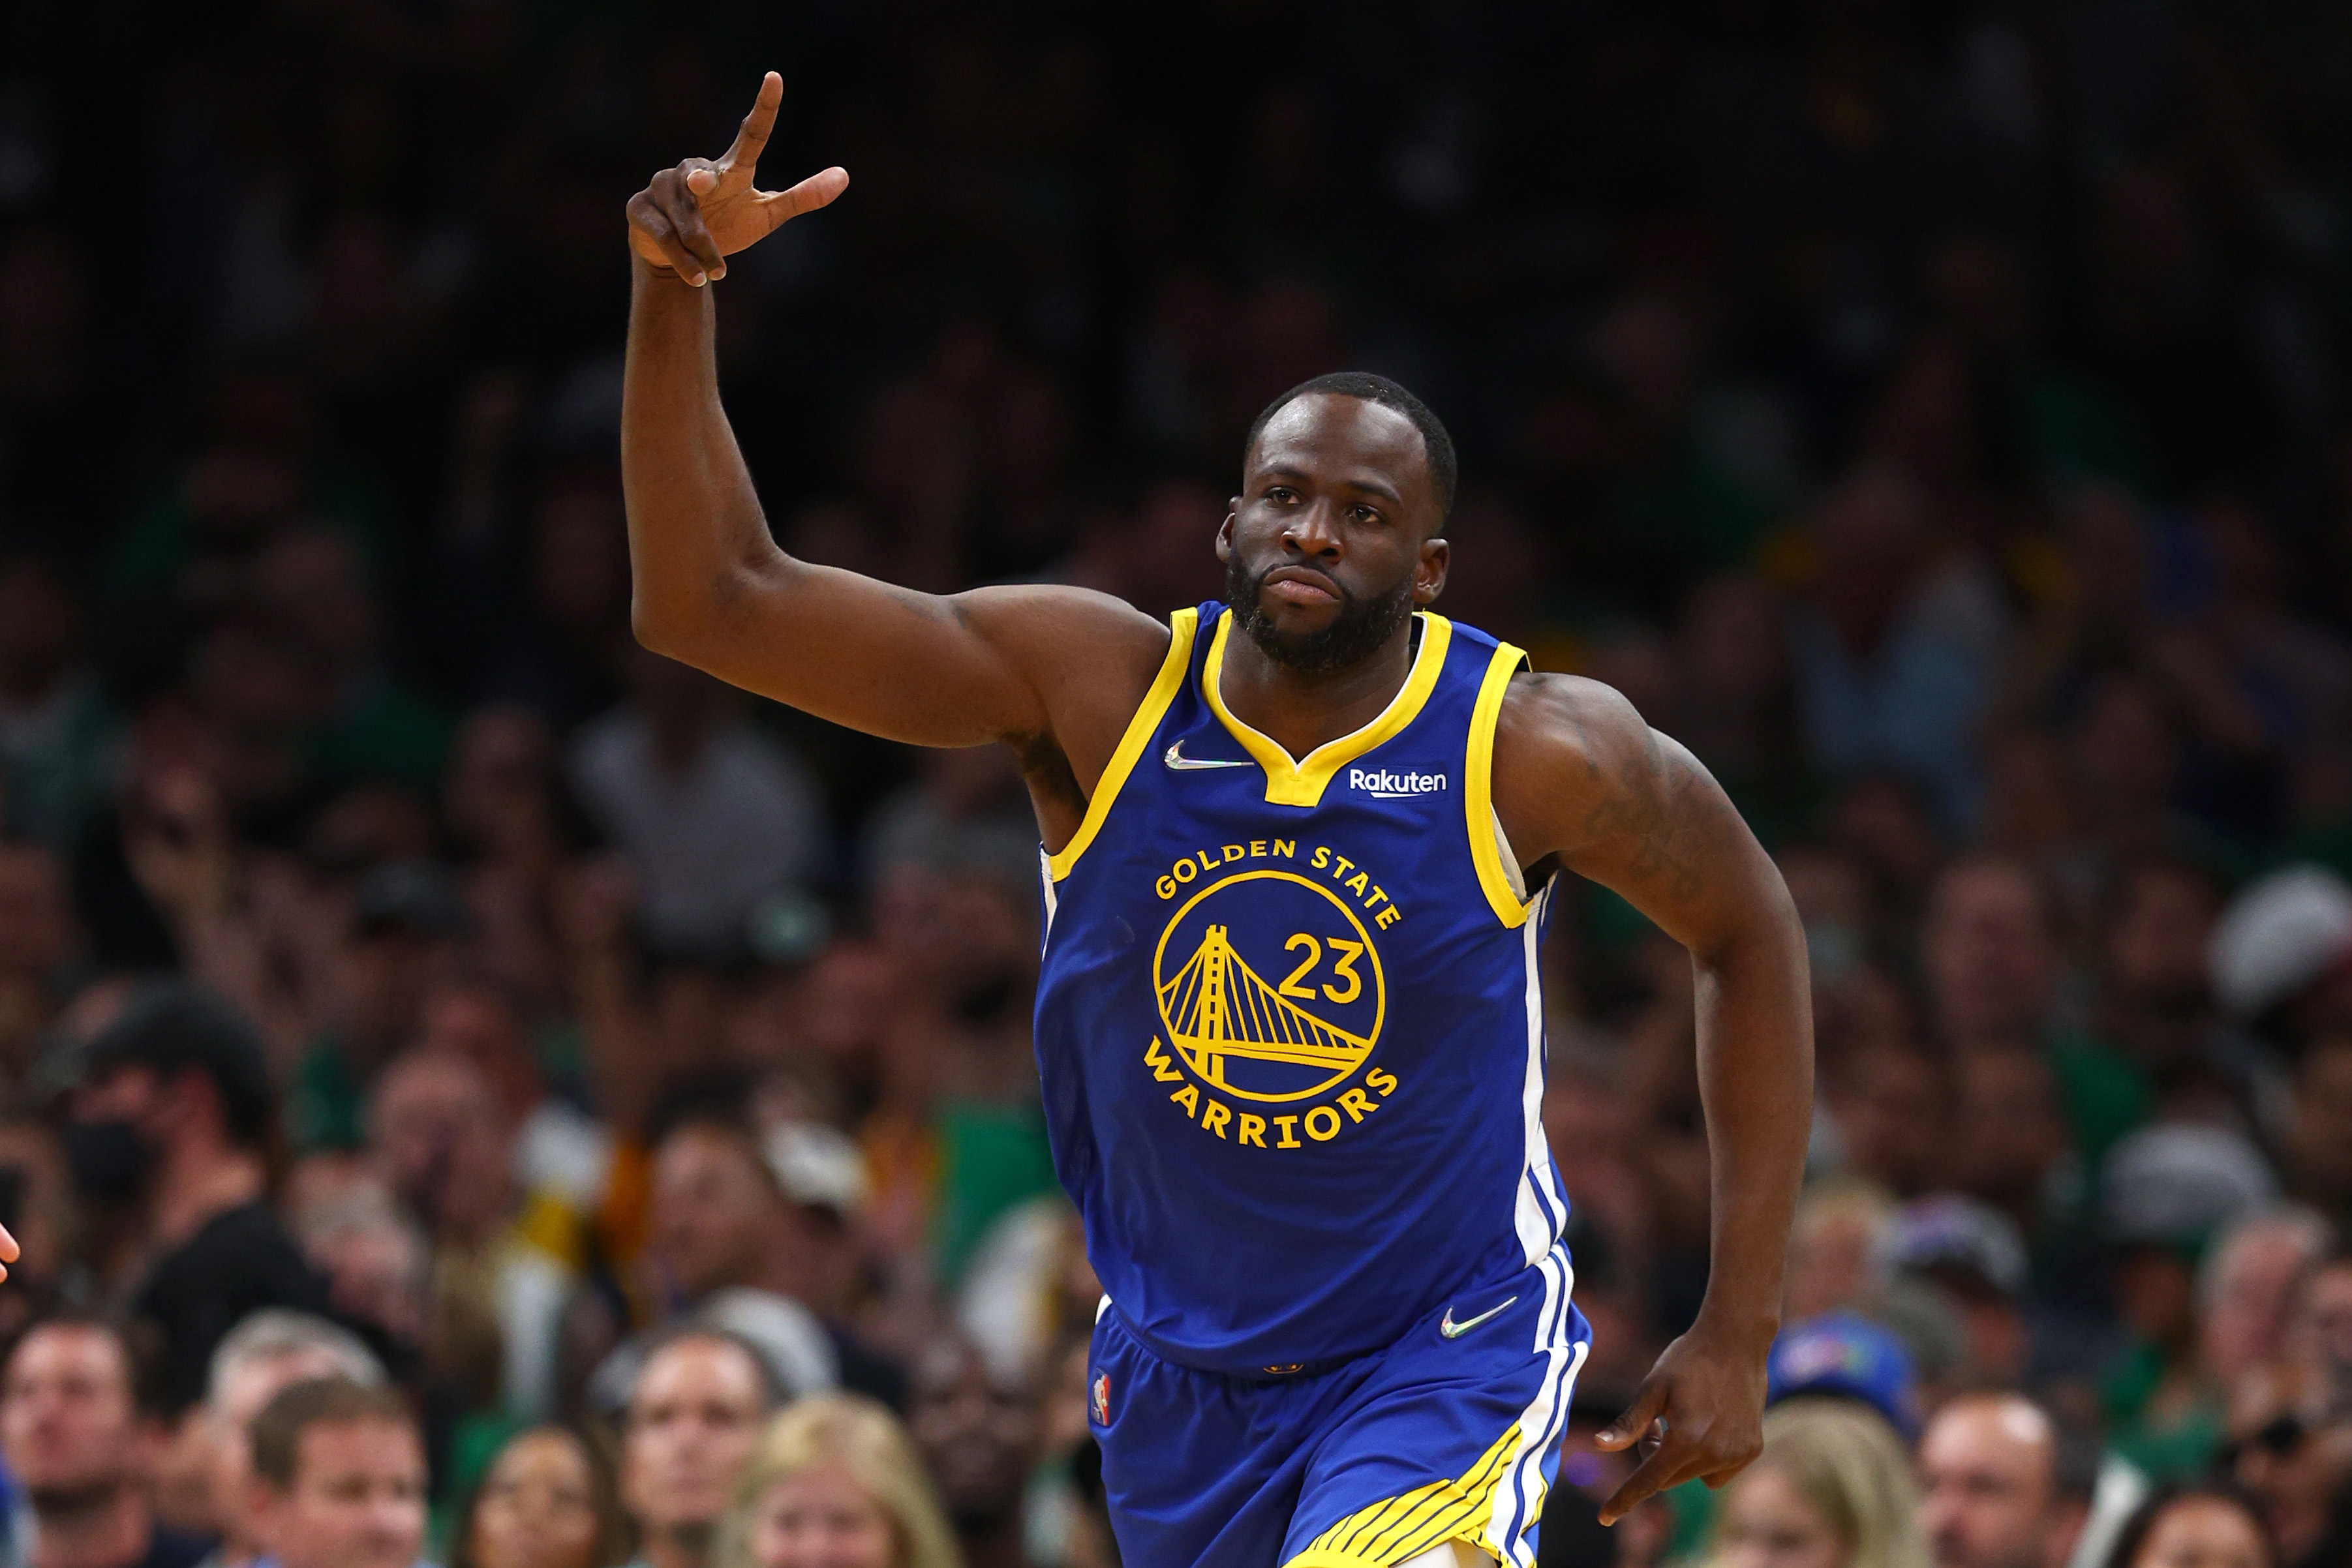 Draymond Green of the Golden State Warriors celebrates a three-pointer against the Boston Celtics.